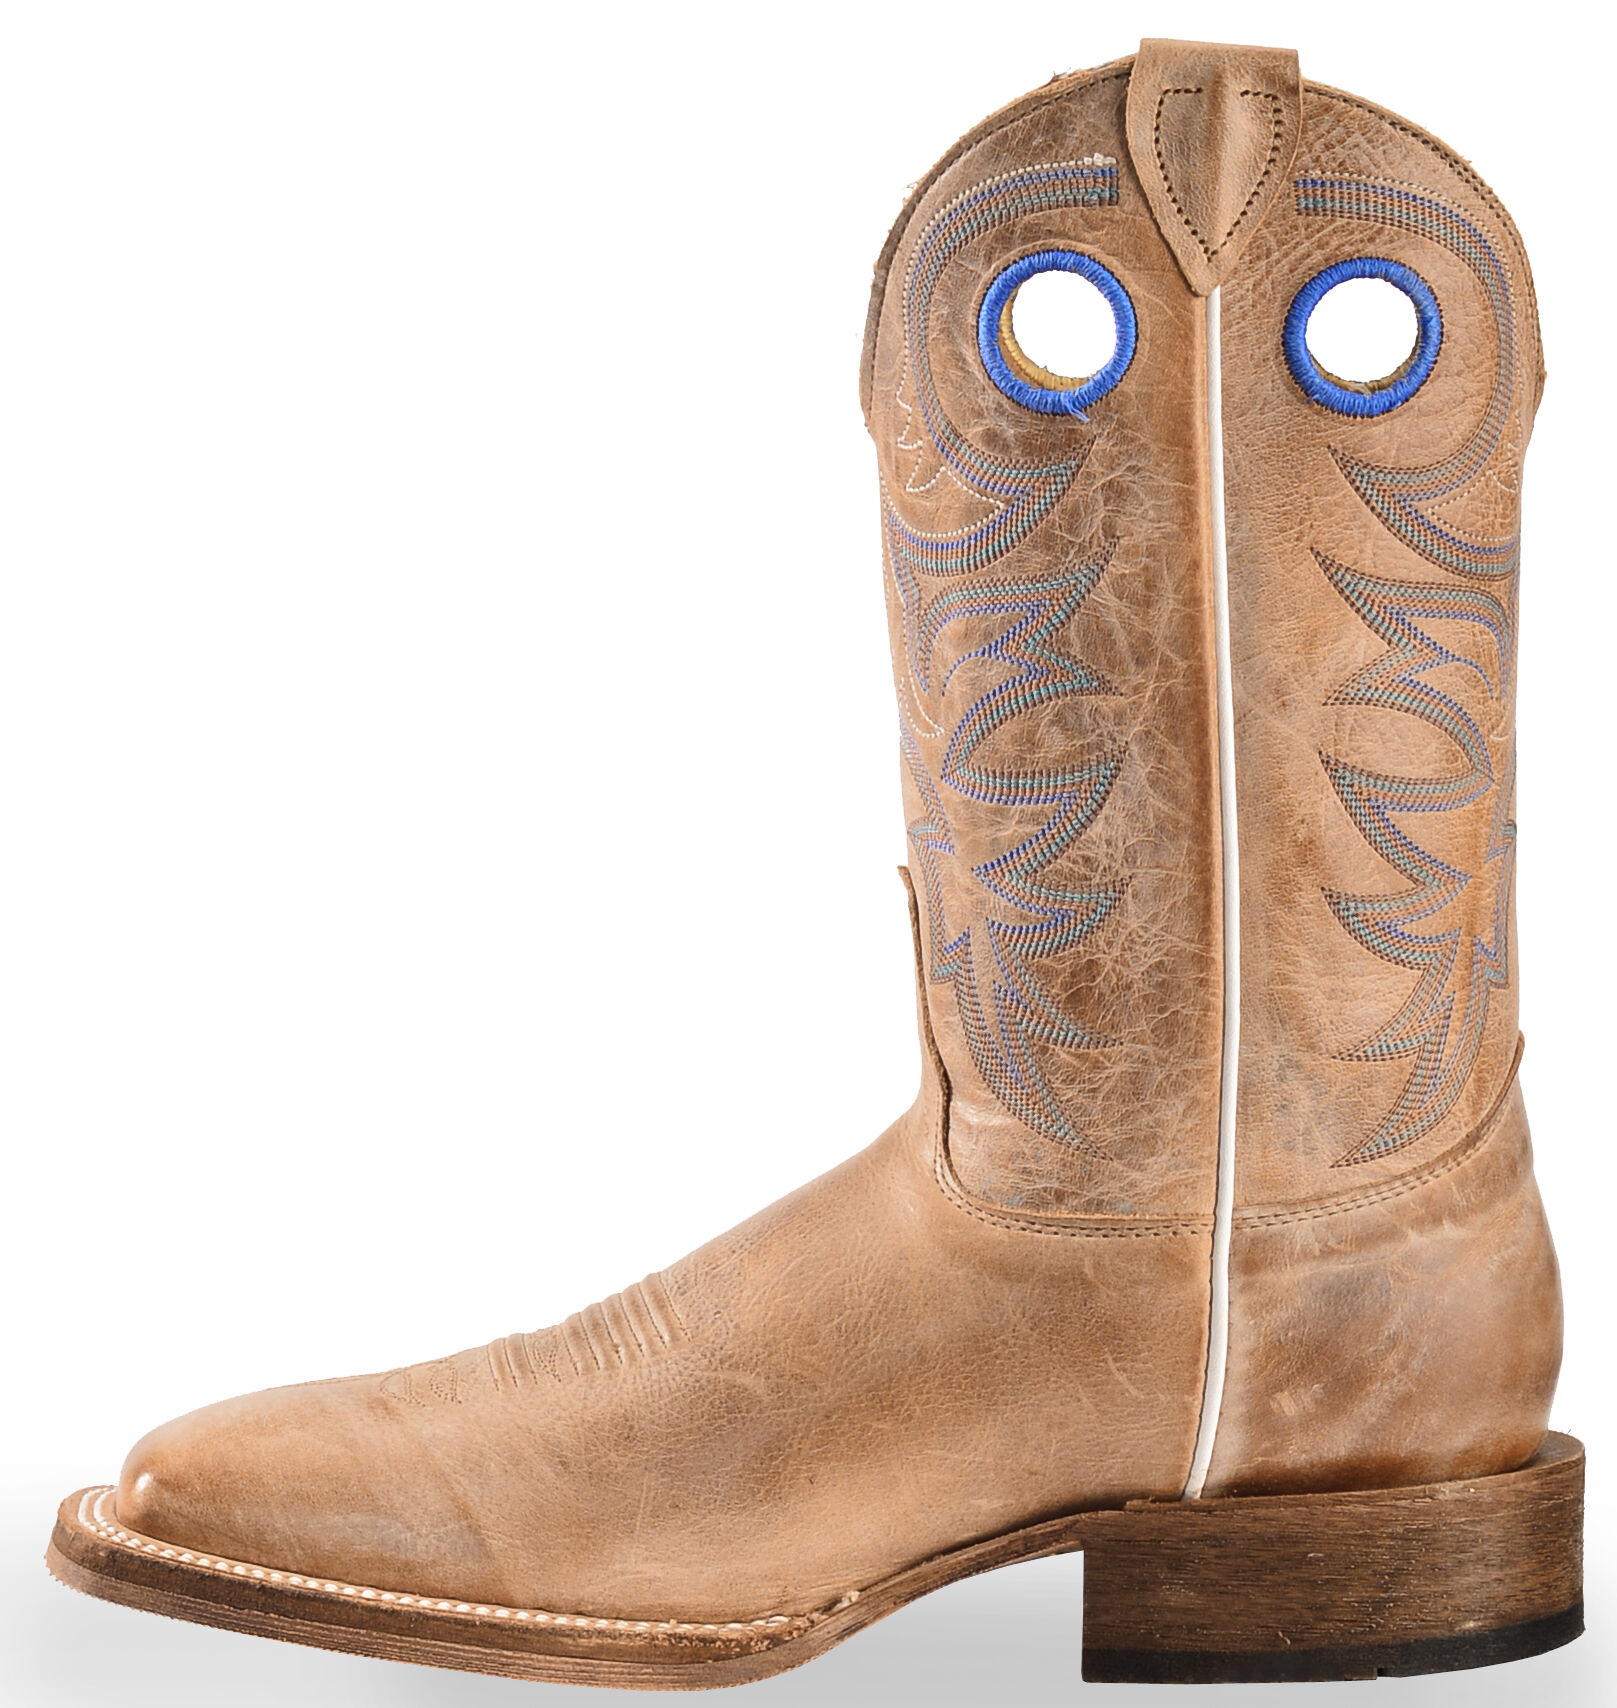 mens justin boots on sale